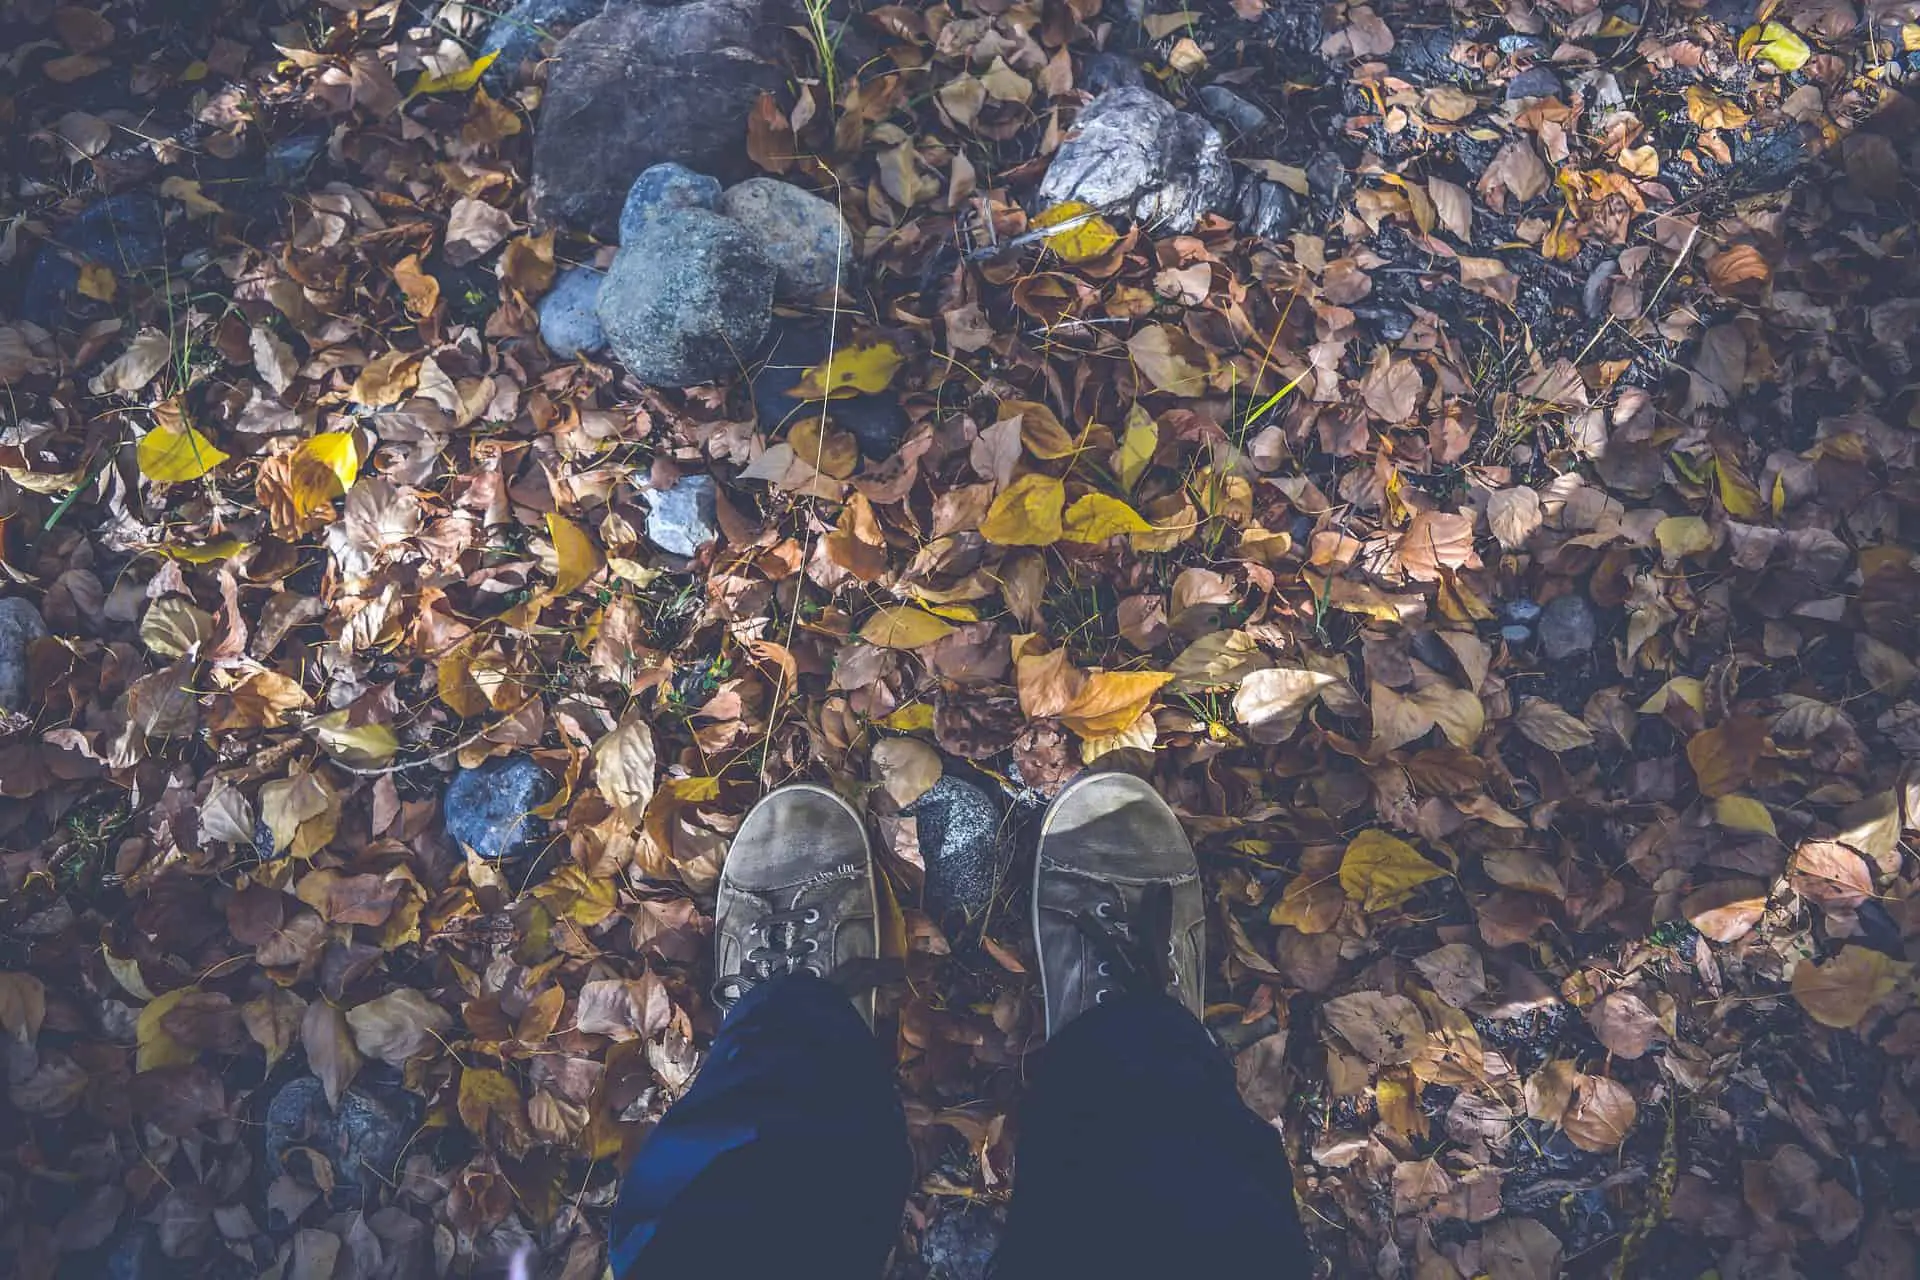 A person's feet wearing a boots and touching the dry leaves while standing in the forest